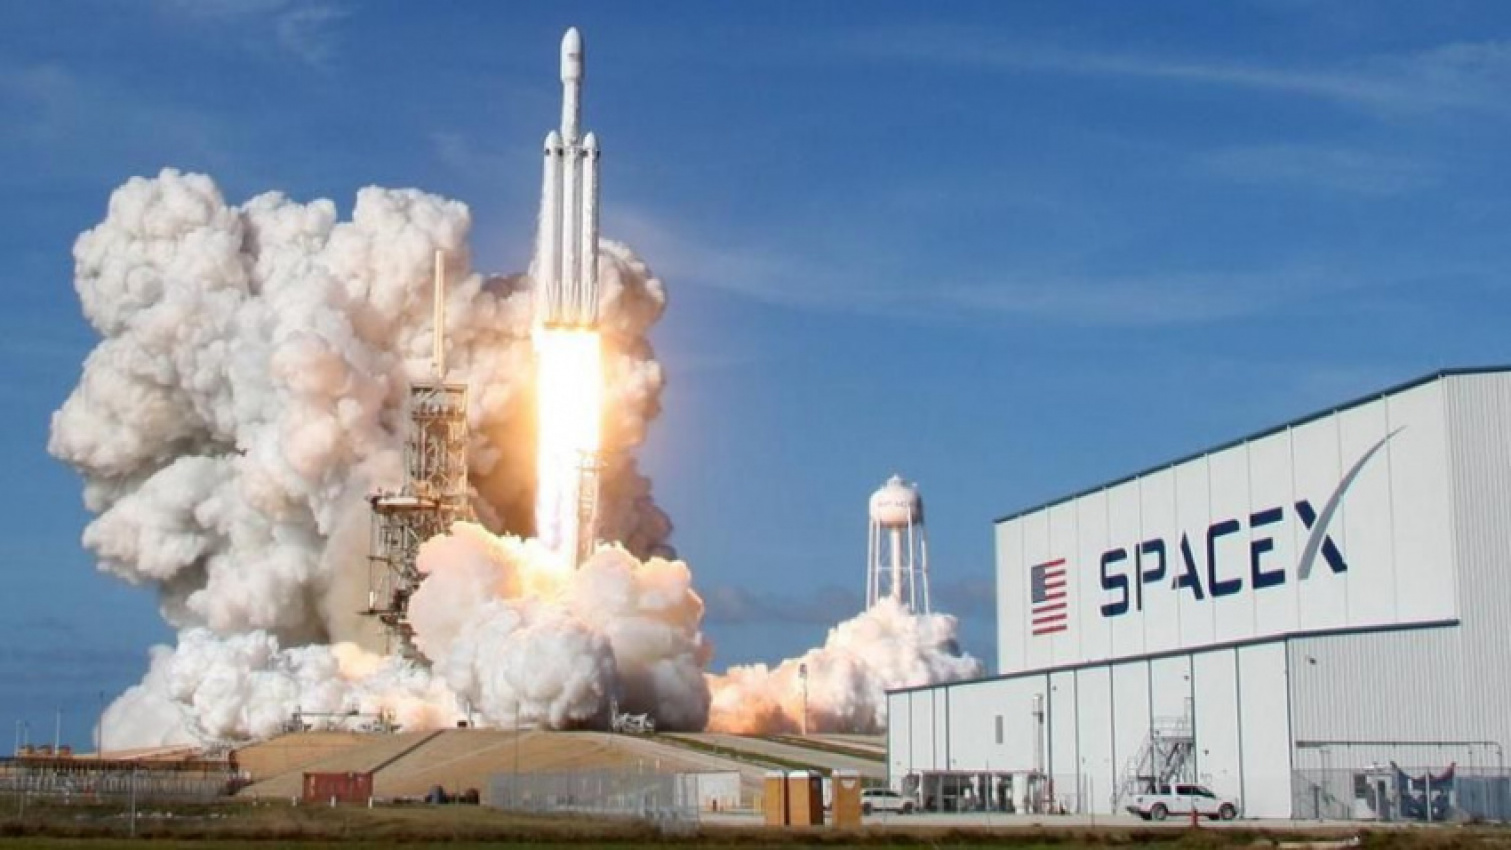 autos, cars, reviews, amazon, axiom space station, blue origin, commercial space travel, cost to travel to space, elon musk, insights, jeff bezos, richard branson, spacex, ticket to space, virgin galactic, amazon, how much does it cost to travel to space?